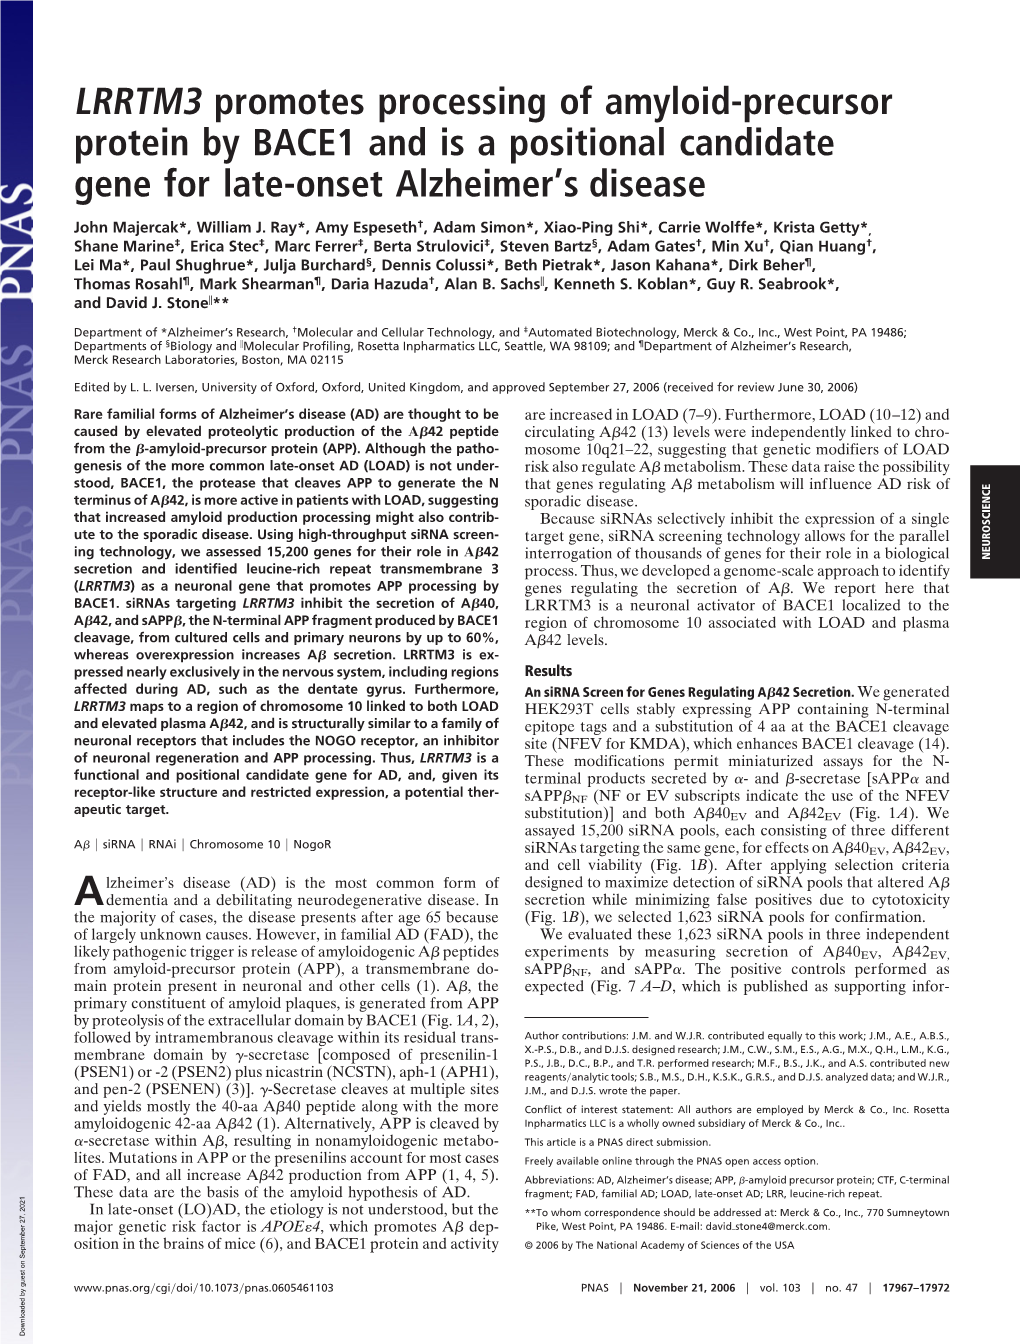 LRRTM3 Promotes Processing of Amyloid-Precursor Protein by BACE1 and Is a Positional Candidate Gene for Late-Onset Alzheimer’S Disease